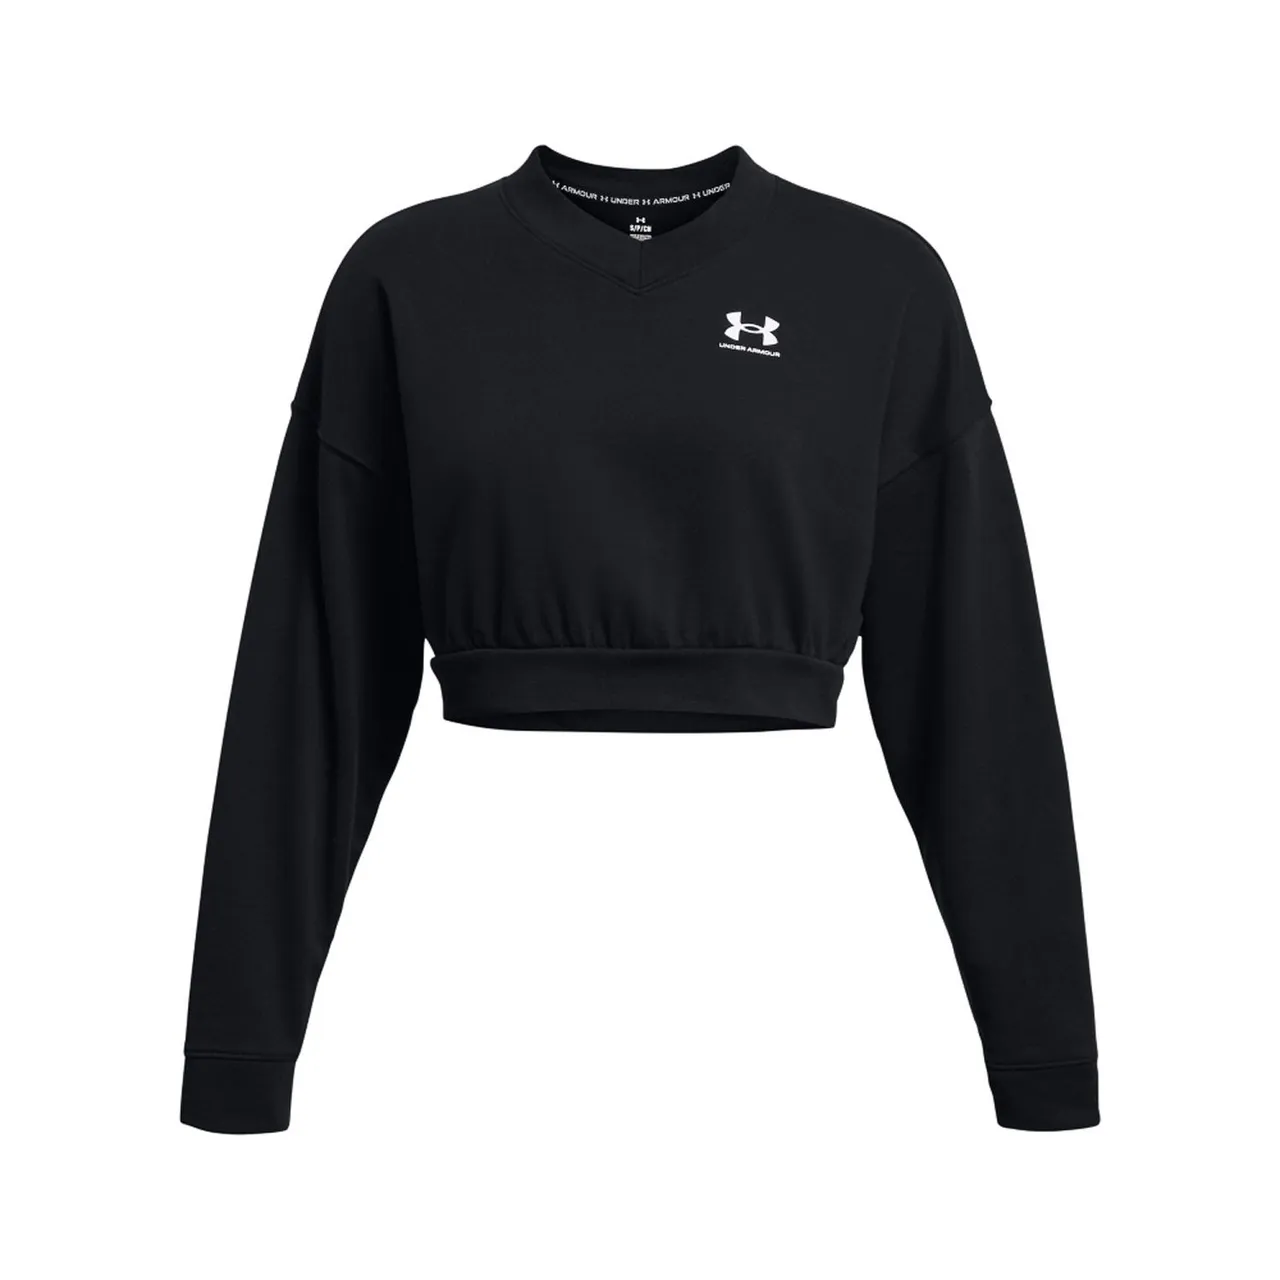 Under Armour Rival Terry Oversized Crop